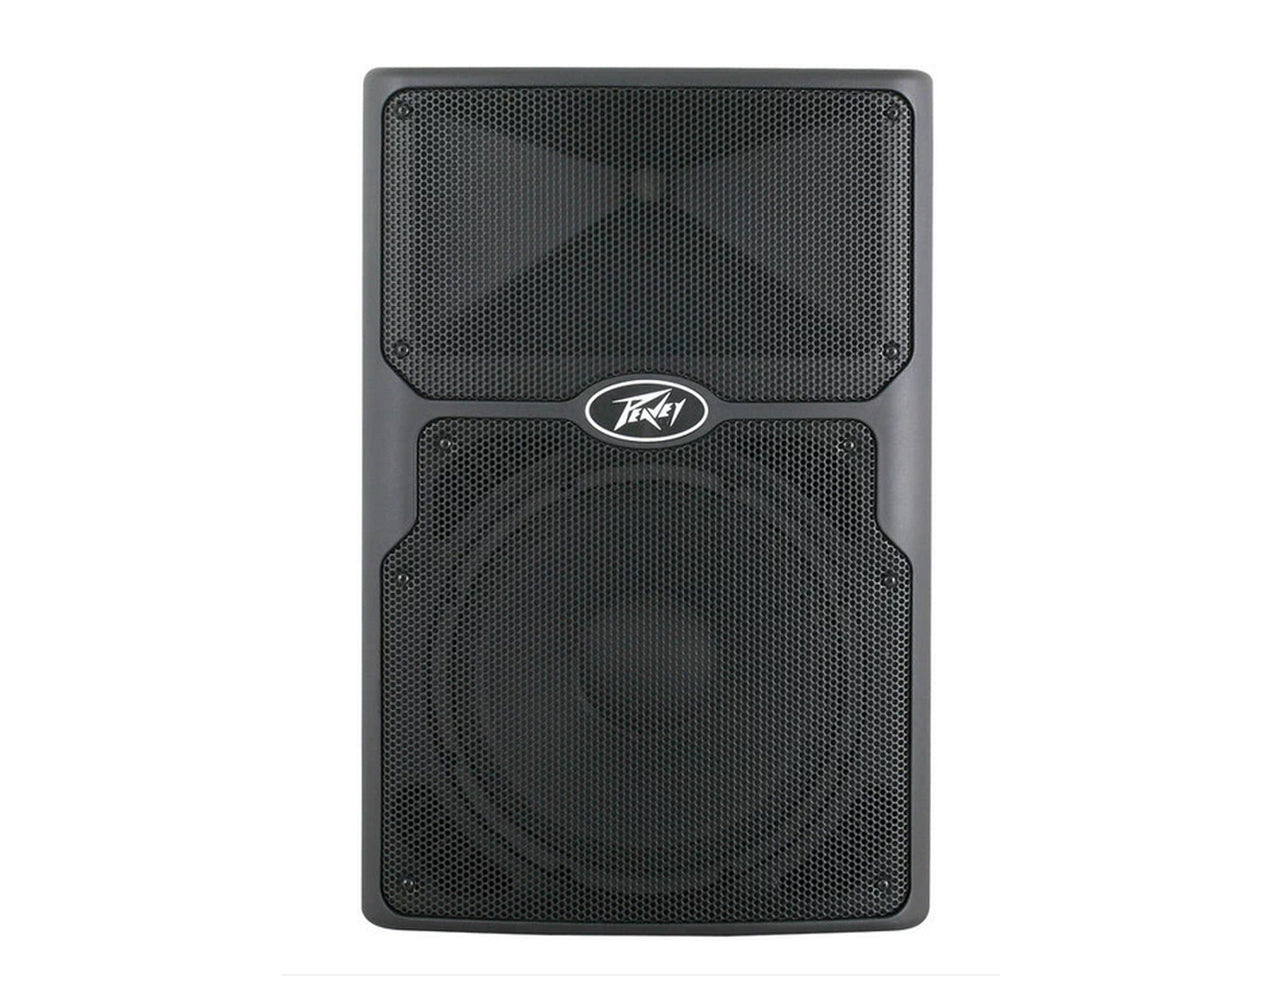 Peavey PVXP15 DSP 15 inch Powered Speaker 800W 15" Powered Speaker with 1.4" Compression Driver,+ Free Mr. Dj Speaker Stand